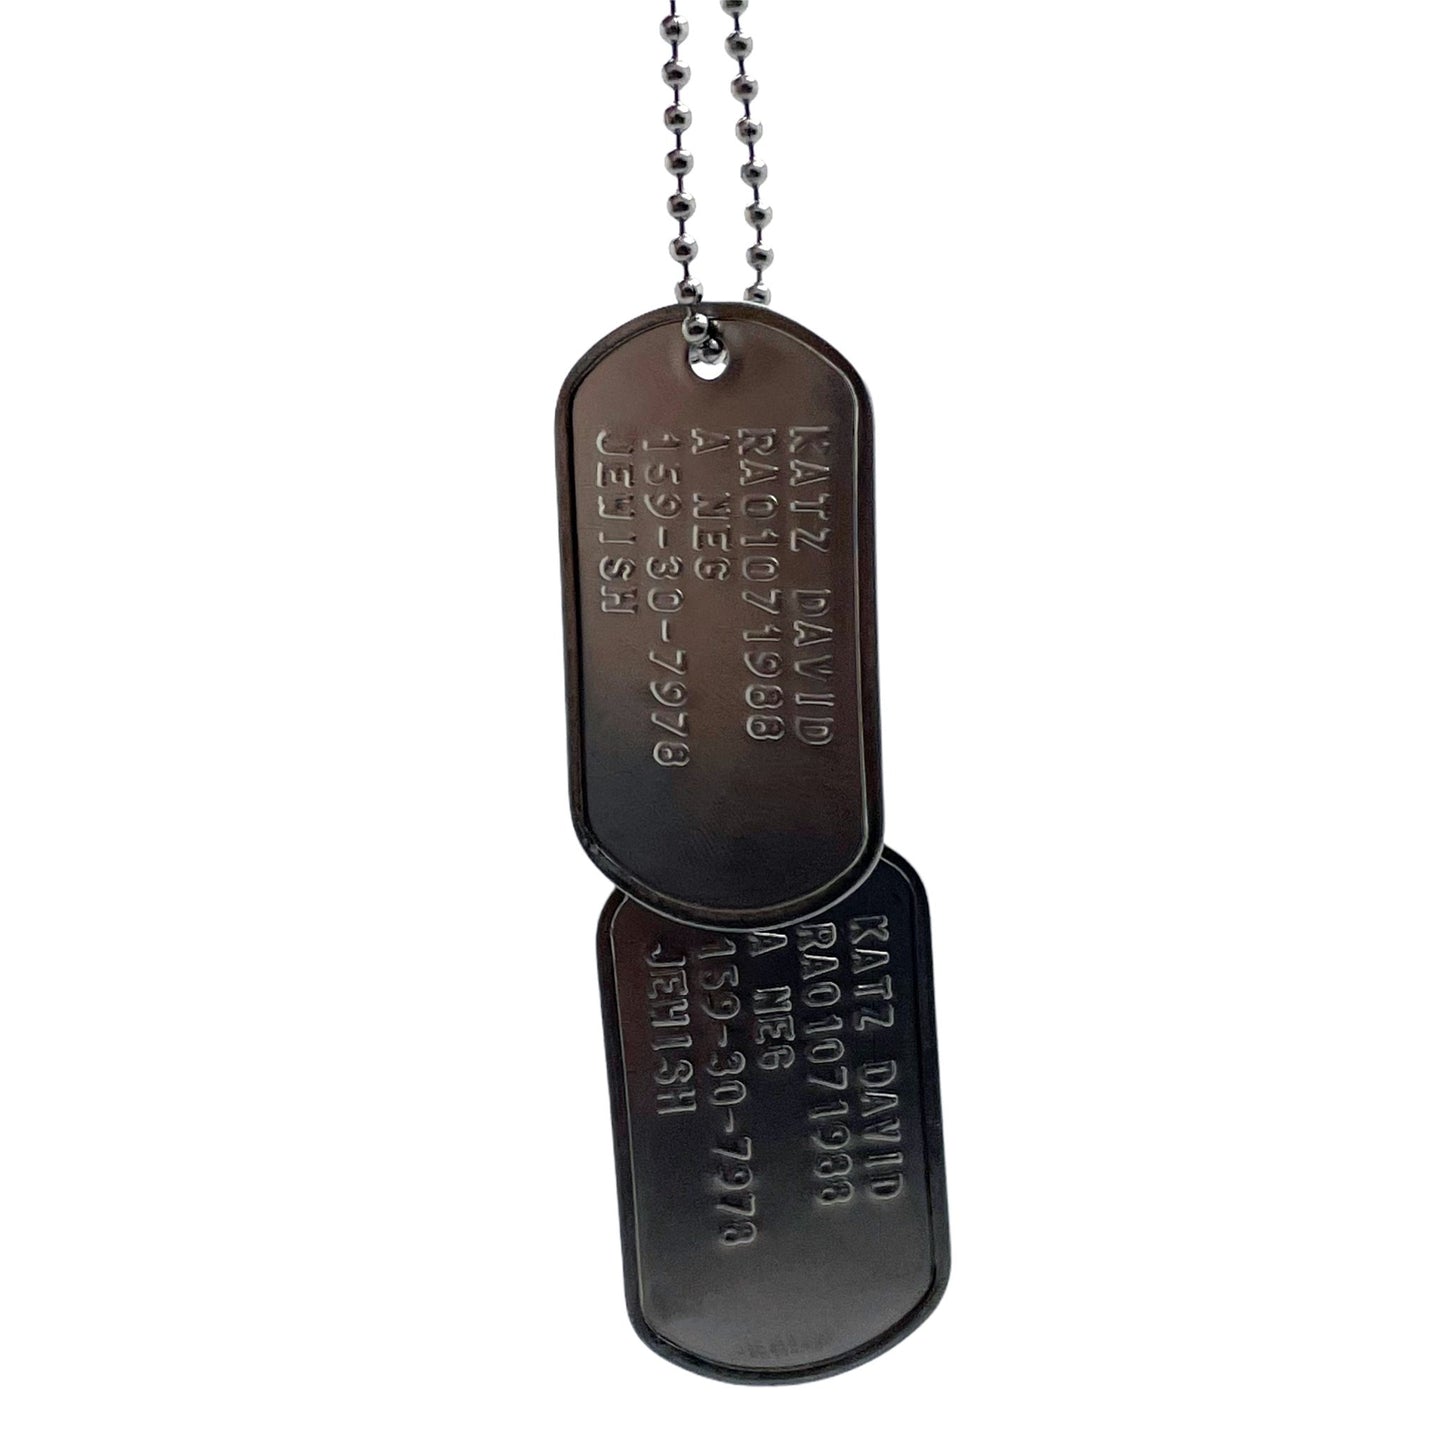 David “Dave” Joseph Katz Umbrella Academy Military Dog Tags Prop Replica - Stainless Steel - Chains&Silencers Included - TheDogTagCo